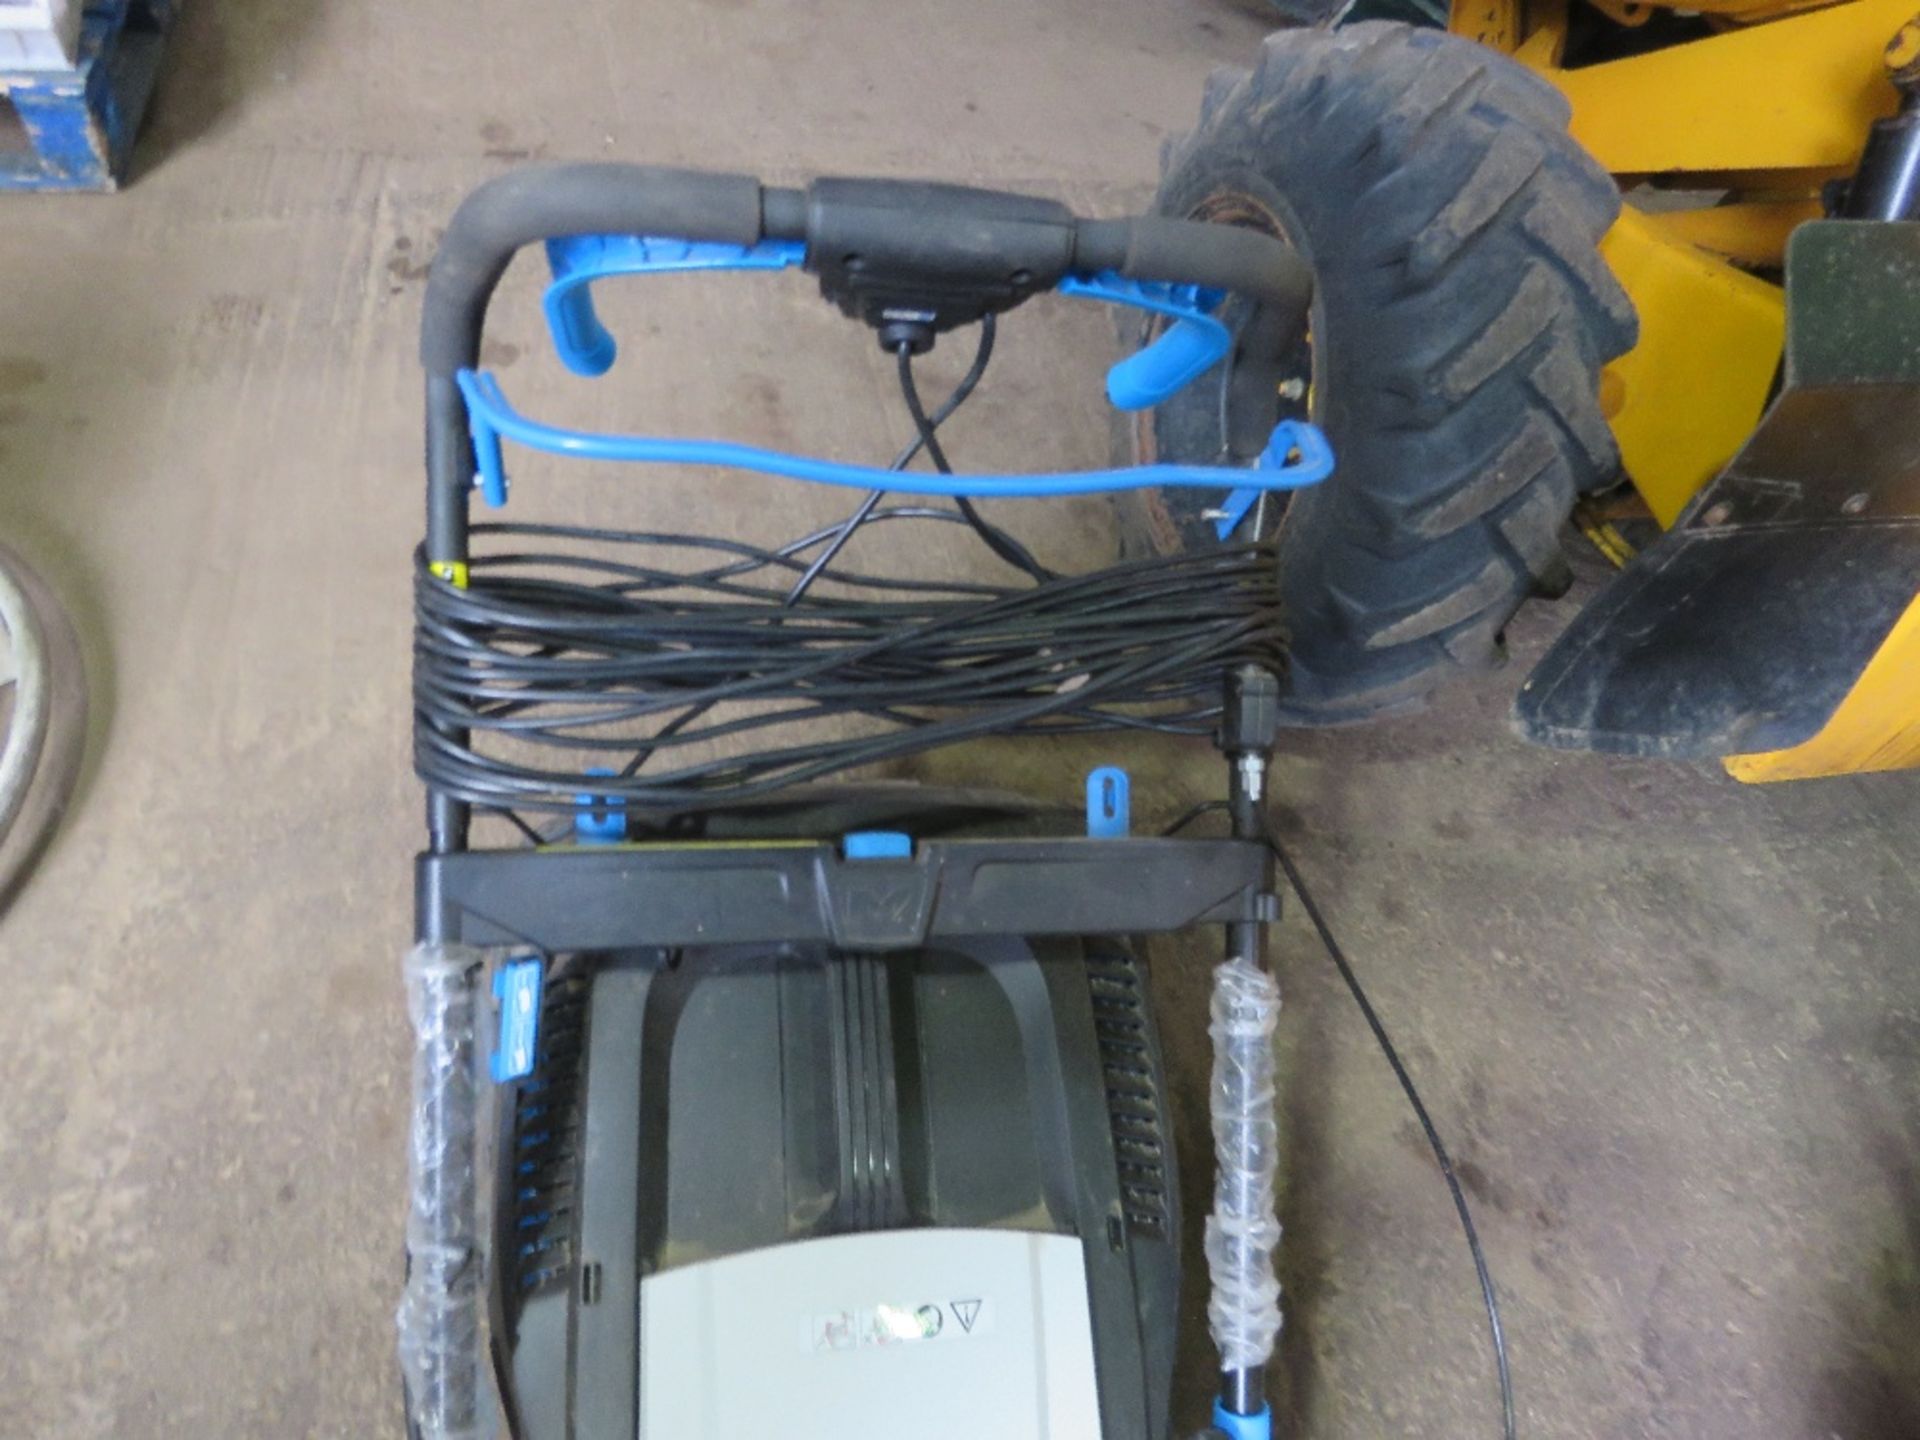 MACALISTER 240VOLT POWERED LAWNMOWER WITH COLLECTOR, 42CM WIDTH, APPEARS LITTLE USED. THIS LOT IS - Image 2 of 3